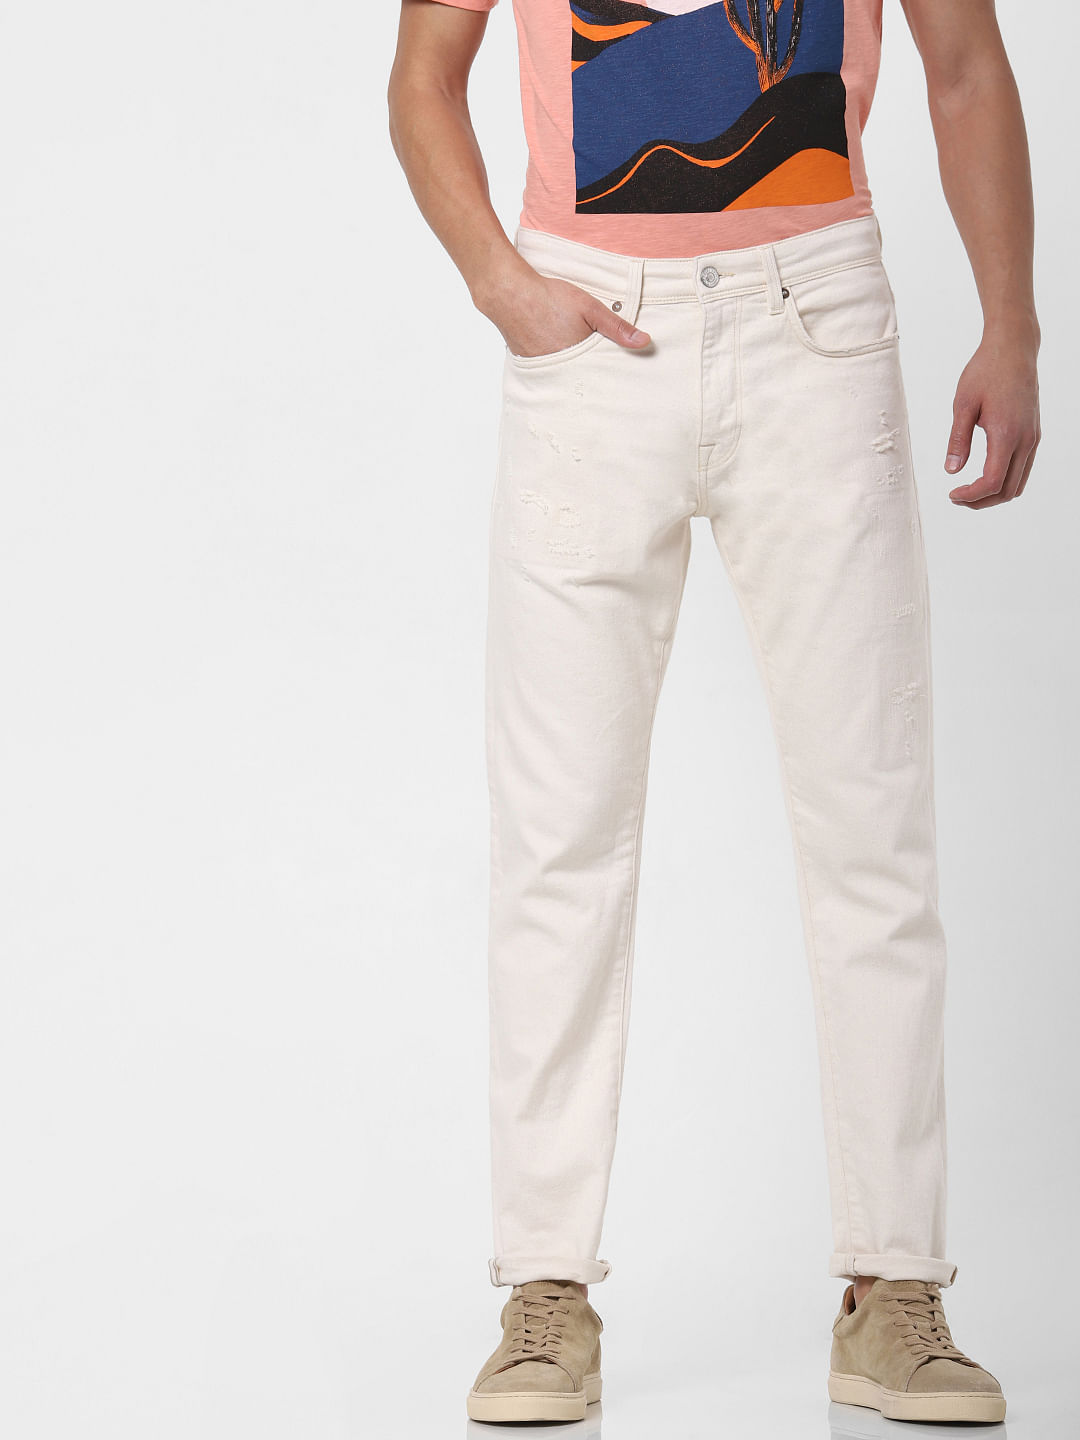 white faded jeans